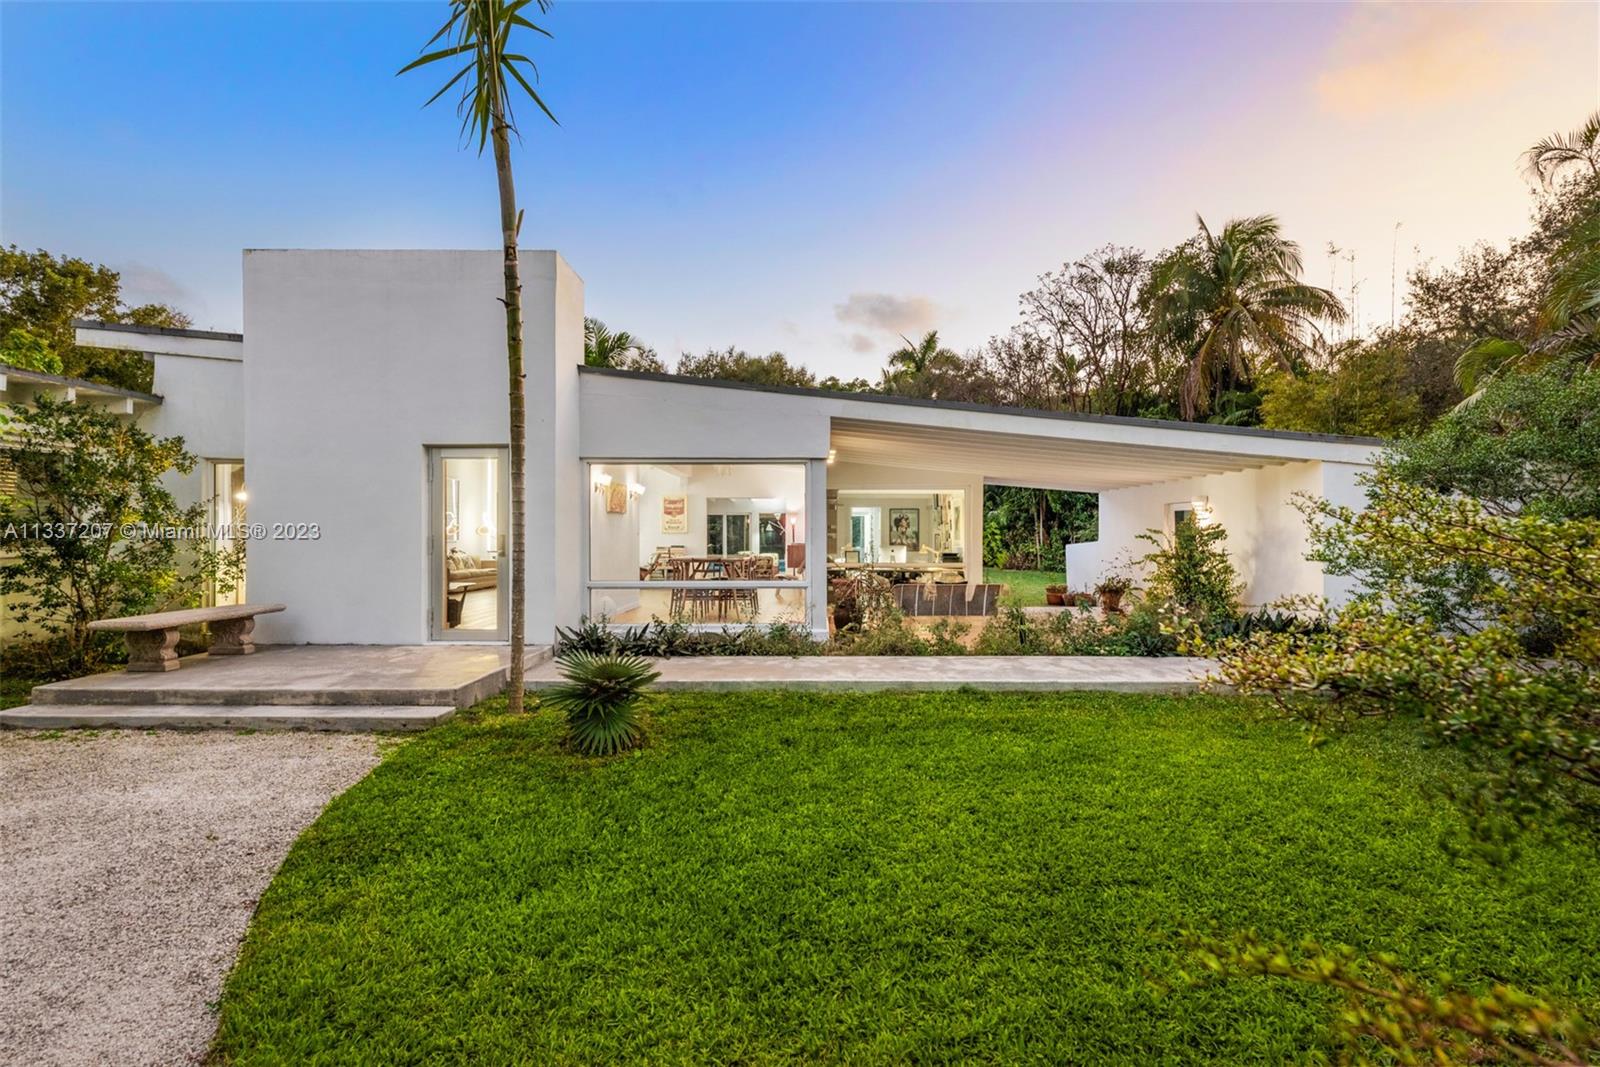 Introducing an extraordinary iconic example of mid-century modern architecture deftly combining the best of both worlds, the desirability of its location and the privacy of a property, with magnificent gardens, on a 39,465 SF lot. Meticulously renovated by current owners in 2015 the home features exquisite wide planks of imported Italian oak wood flooring, dark UV solar tinted impact glass, a formal dining room with garden views that help create a dreamy, floating existence.The well appointed eat in kitchen with top of the line appliances and family room open to a magical garden and glistening pool 8' at its deepest. 
The sprawling primary bedroom consists of oversize alcove, walk in closet, stunning tiled bath with soaking tub and transparent rain shower room. This home is a true gem.